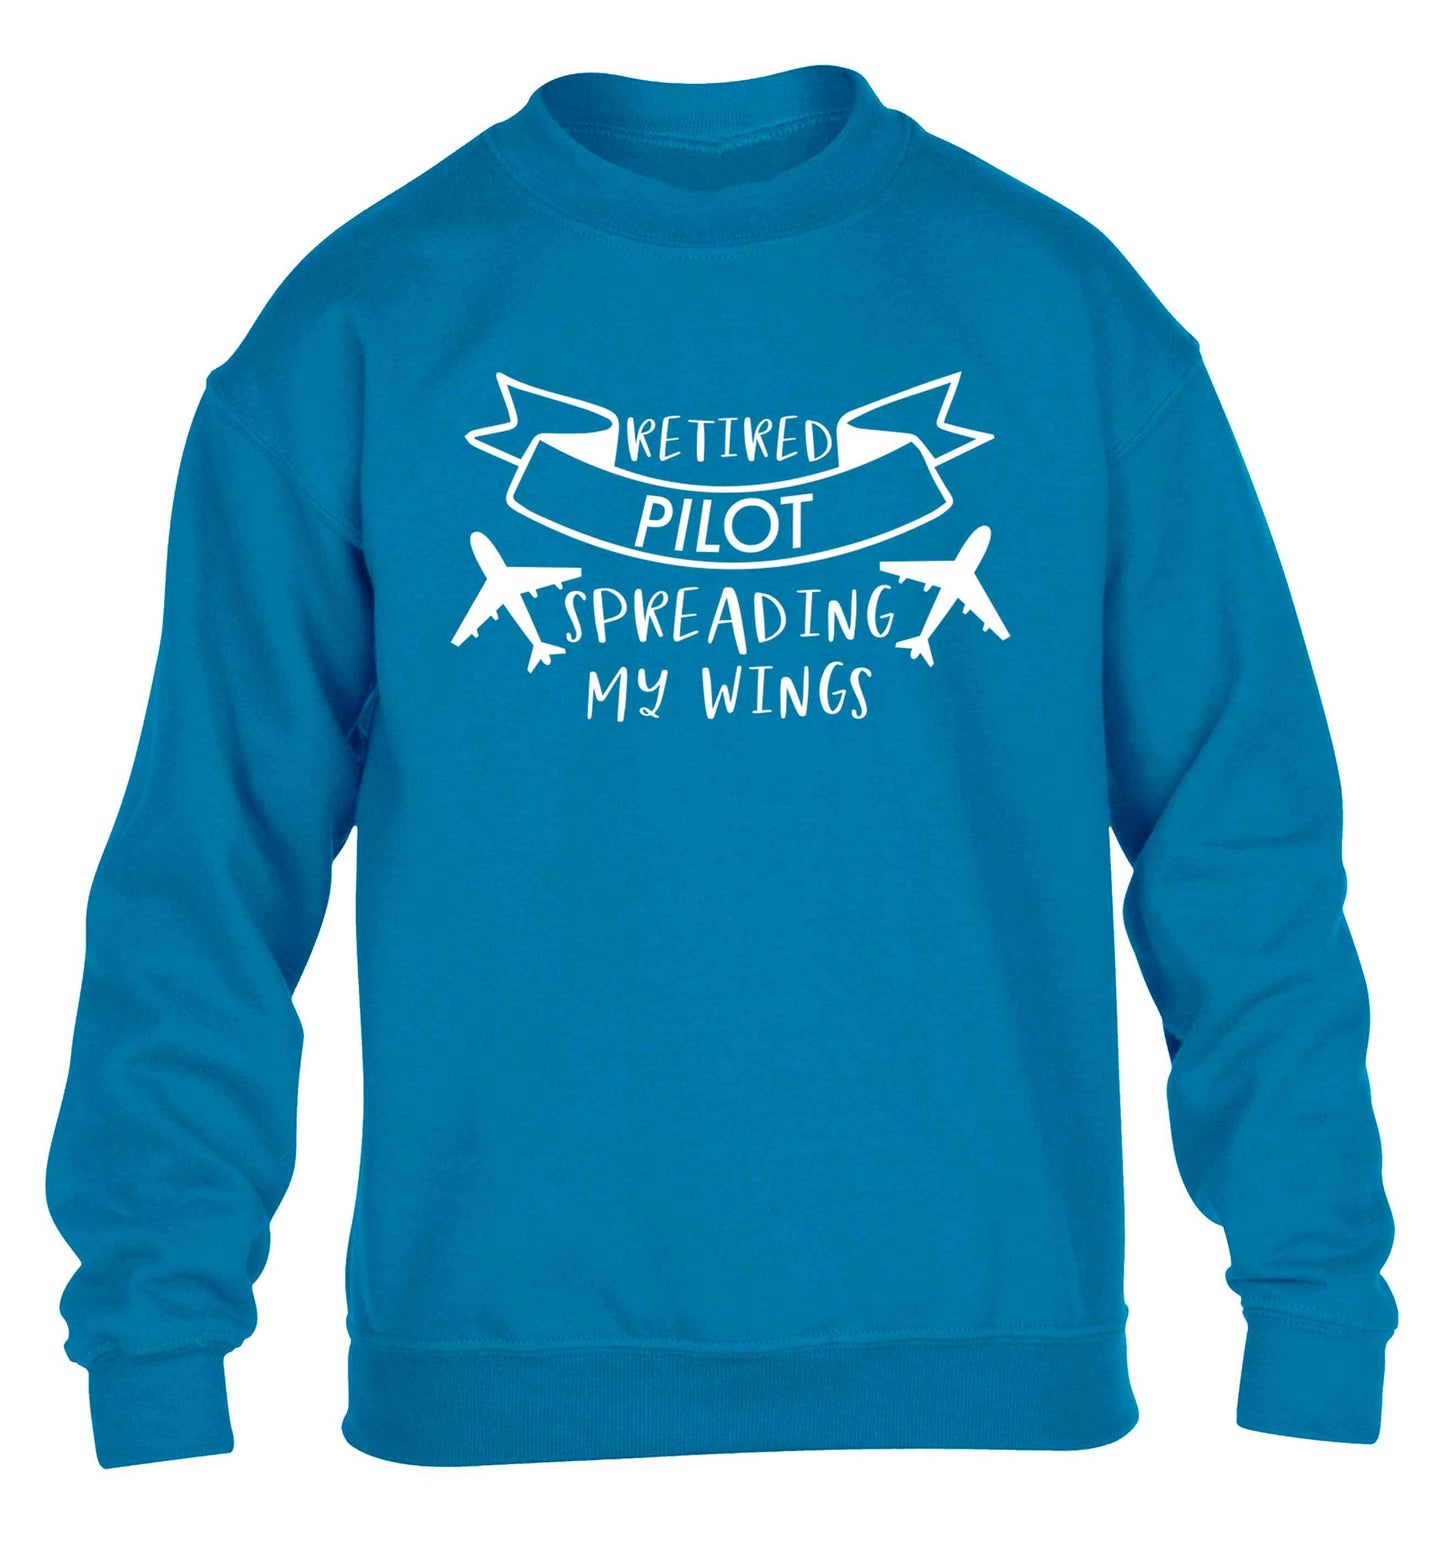 Retired pilot spreading my wings children's blue sweater 12-13 Years